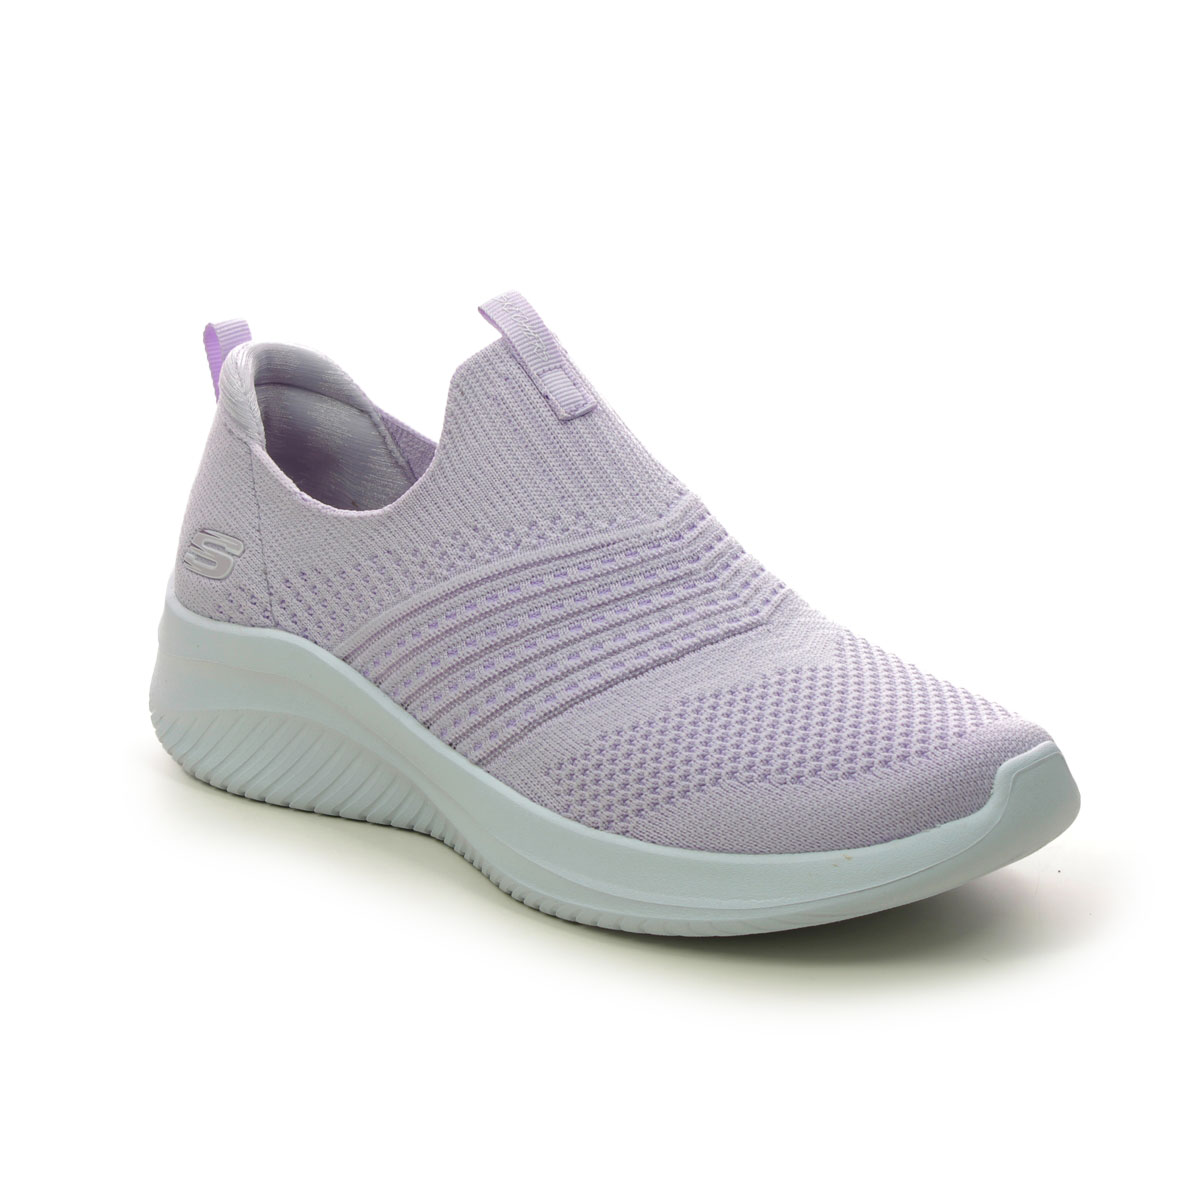 Skechers Ultra Flex 3.0 LAV Lavender Womens trainers 149855 in a Plain Textile in Size 4.5